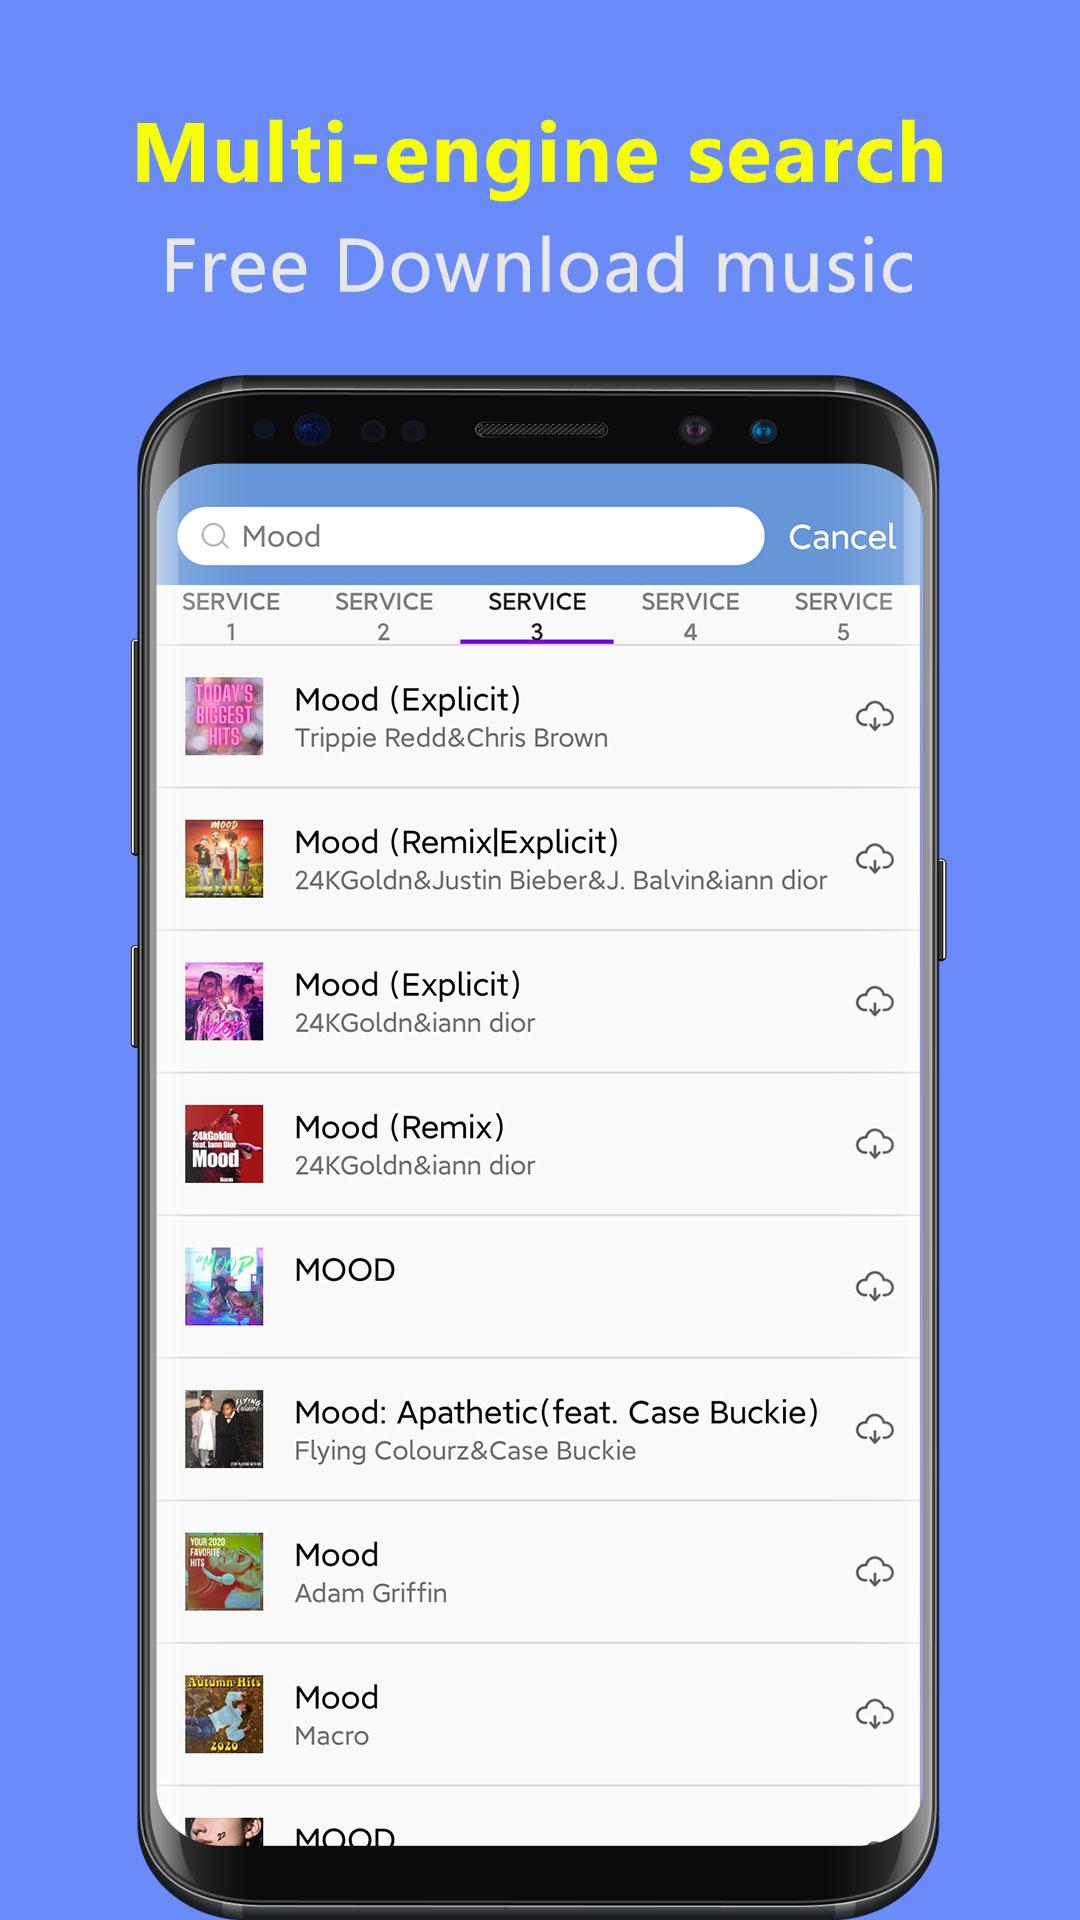 Free Music Downloader - Free MP3 song download for Android - APK Download